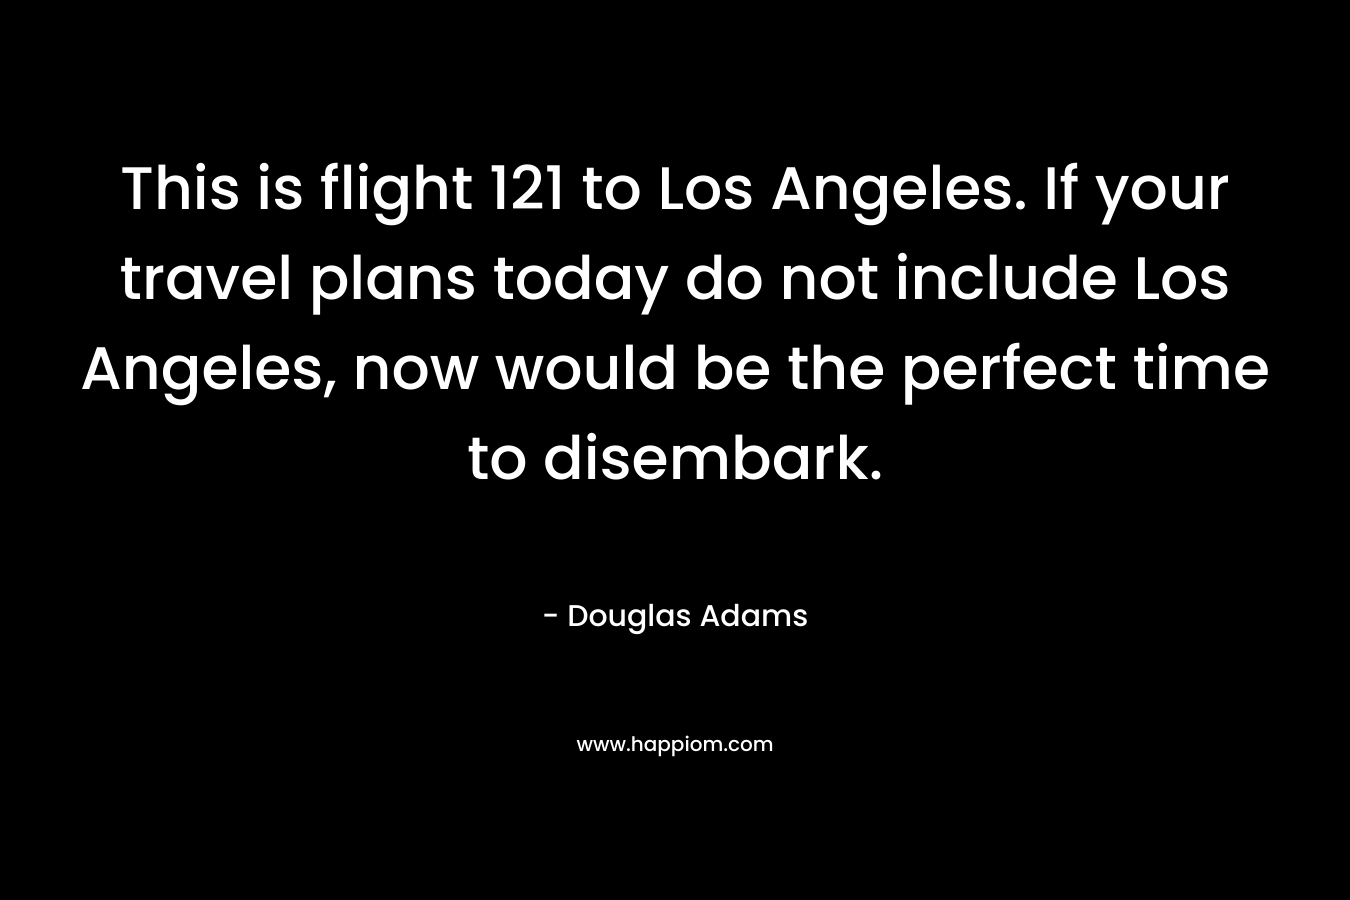 This is flight 121 to Los Angeles. If your travel plans today do not include Los Angeles, now would be the perfect time to disembark. – Douglas Adams